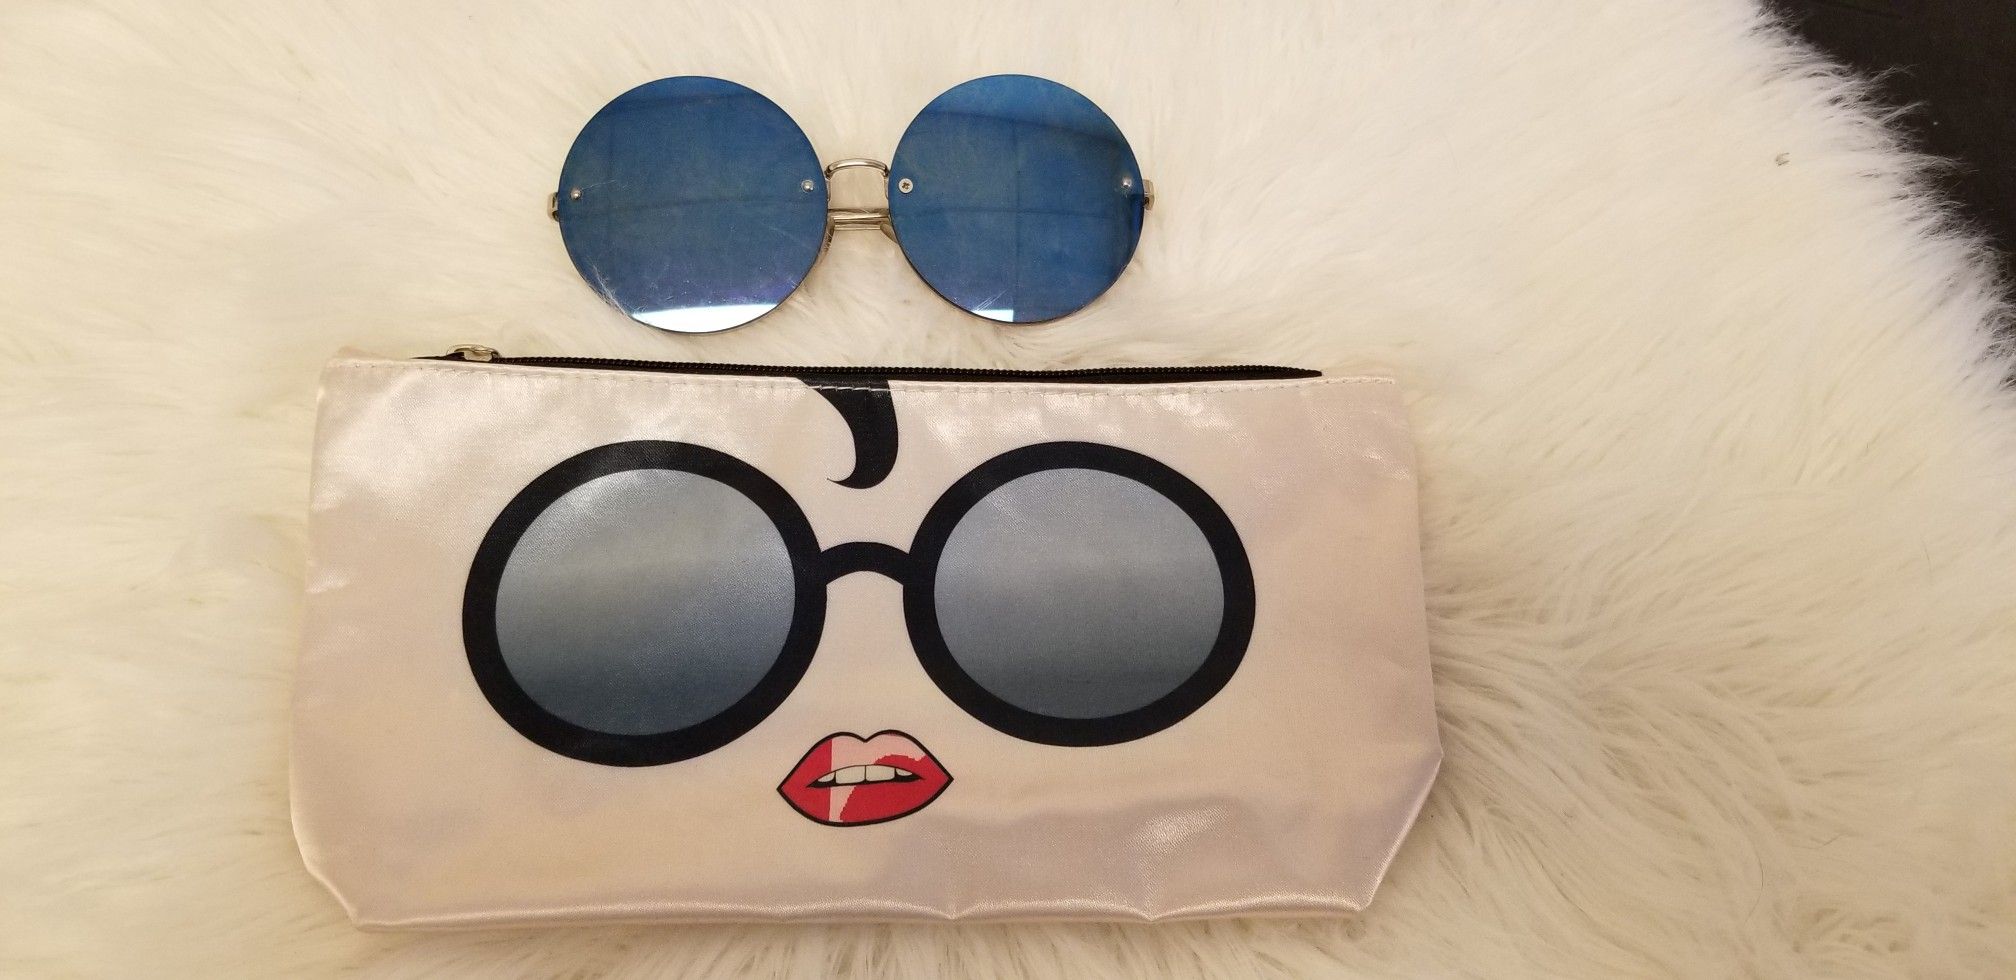 TINTED BLUE ROUND SUNGLASSES W POUCH